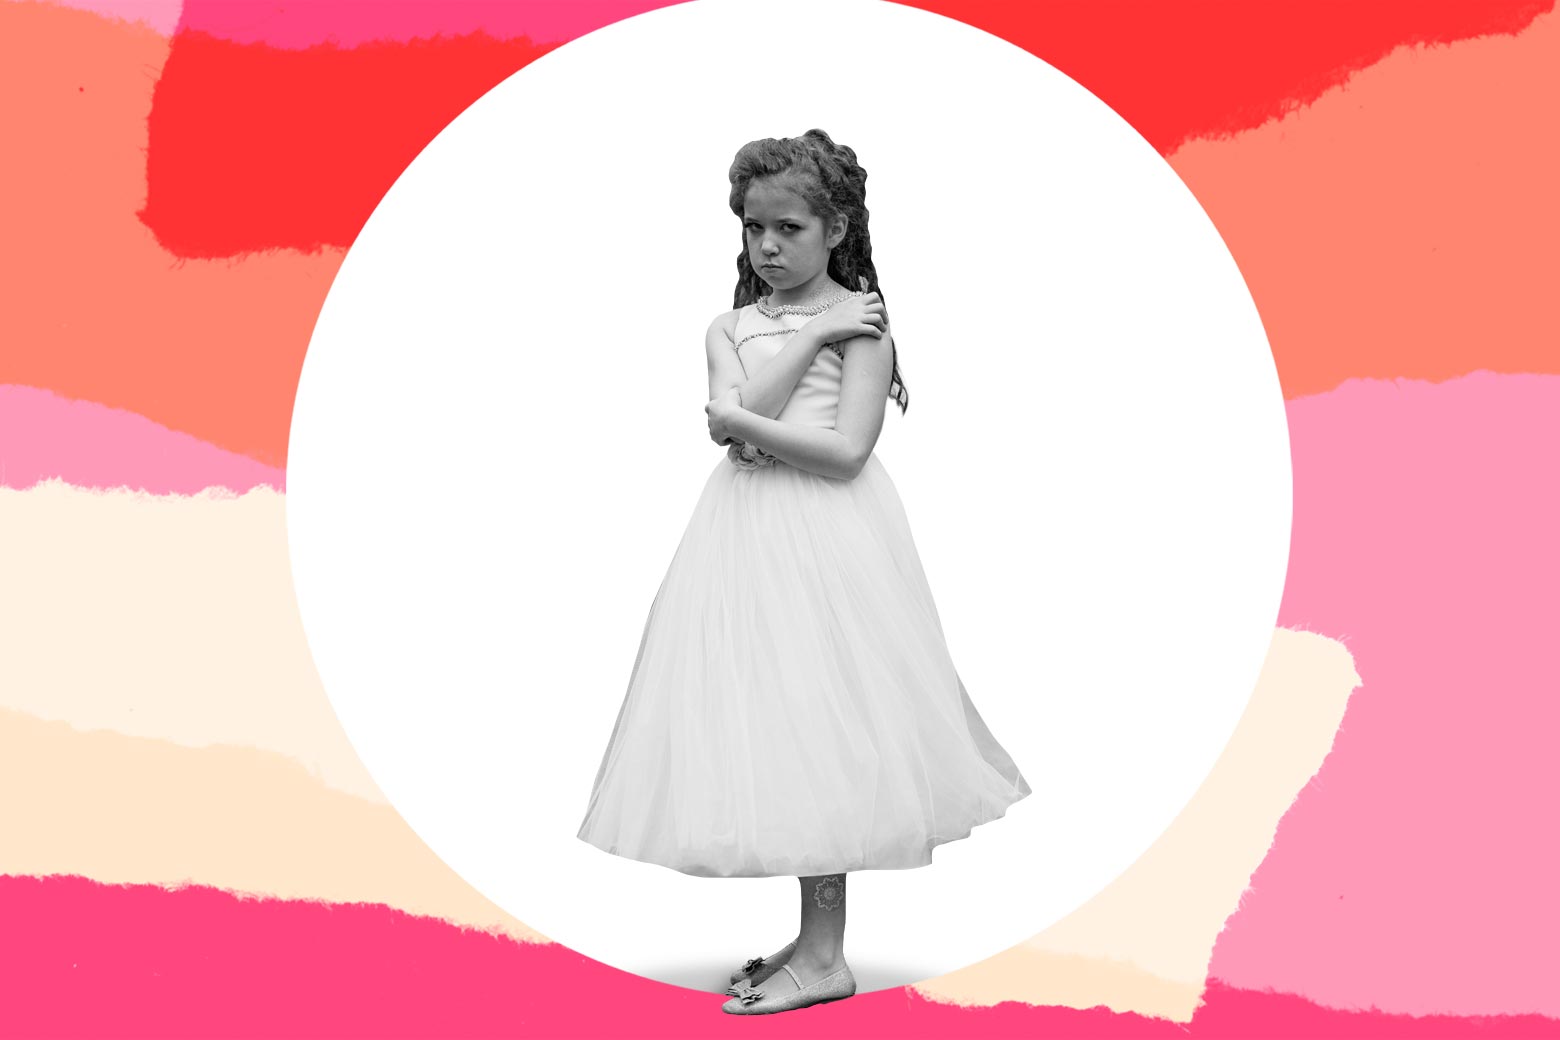 A young girl in a dress looking miserable